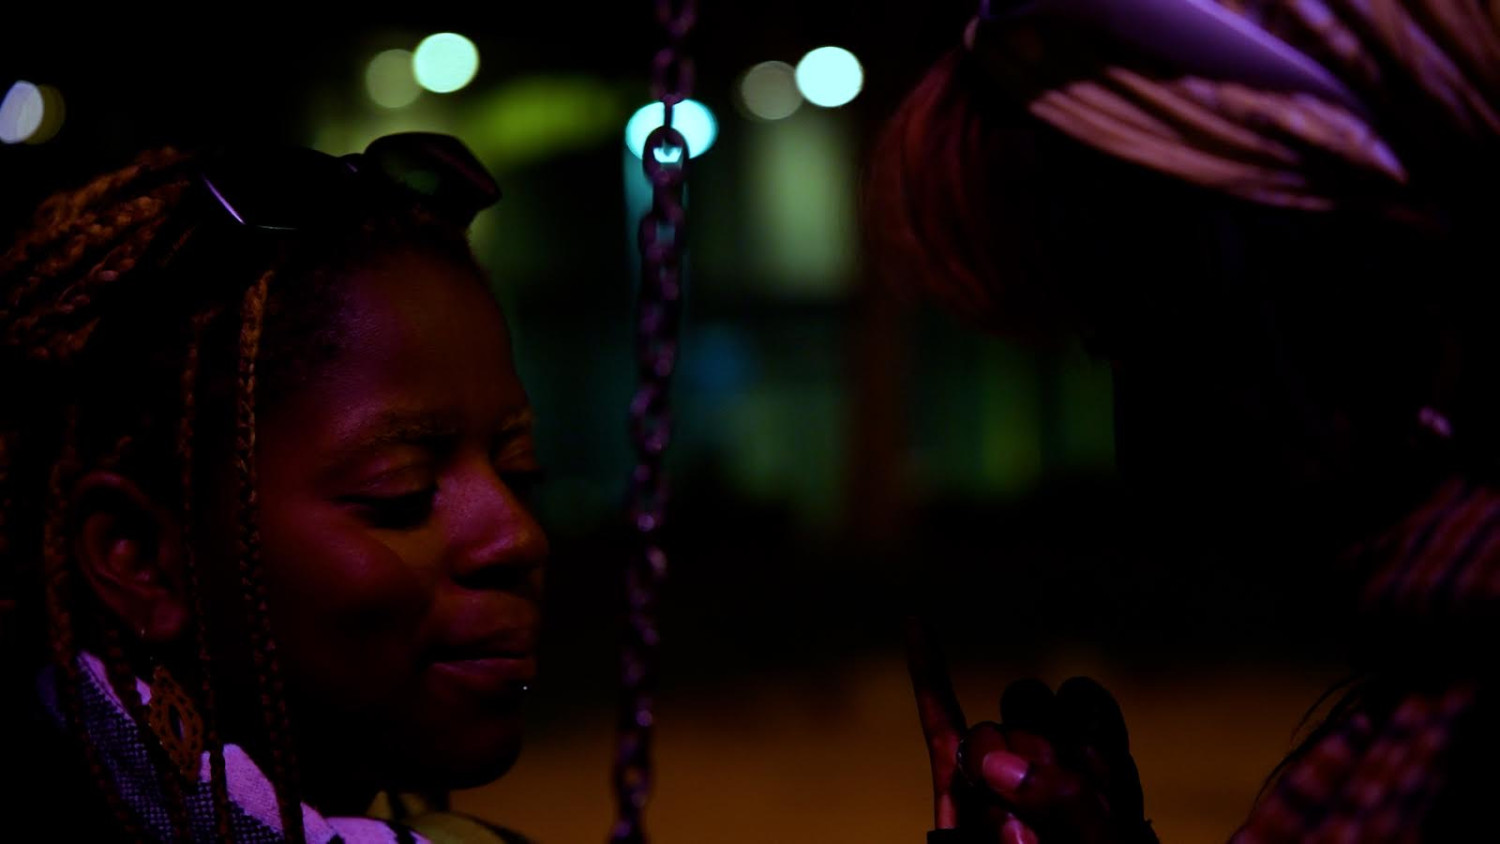 Stills from short film *POINT OF VIEW*. Written and directed by Dasha Makaroff. Starring Siobhan Matshazi and Debbie Shonowo